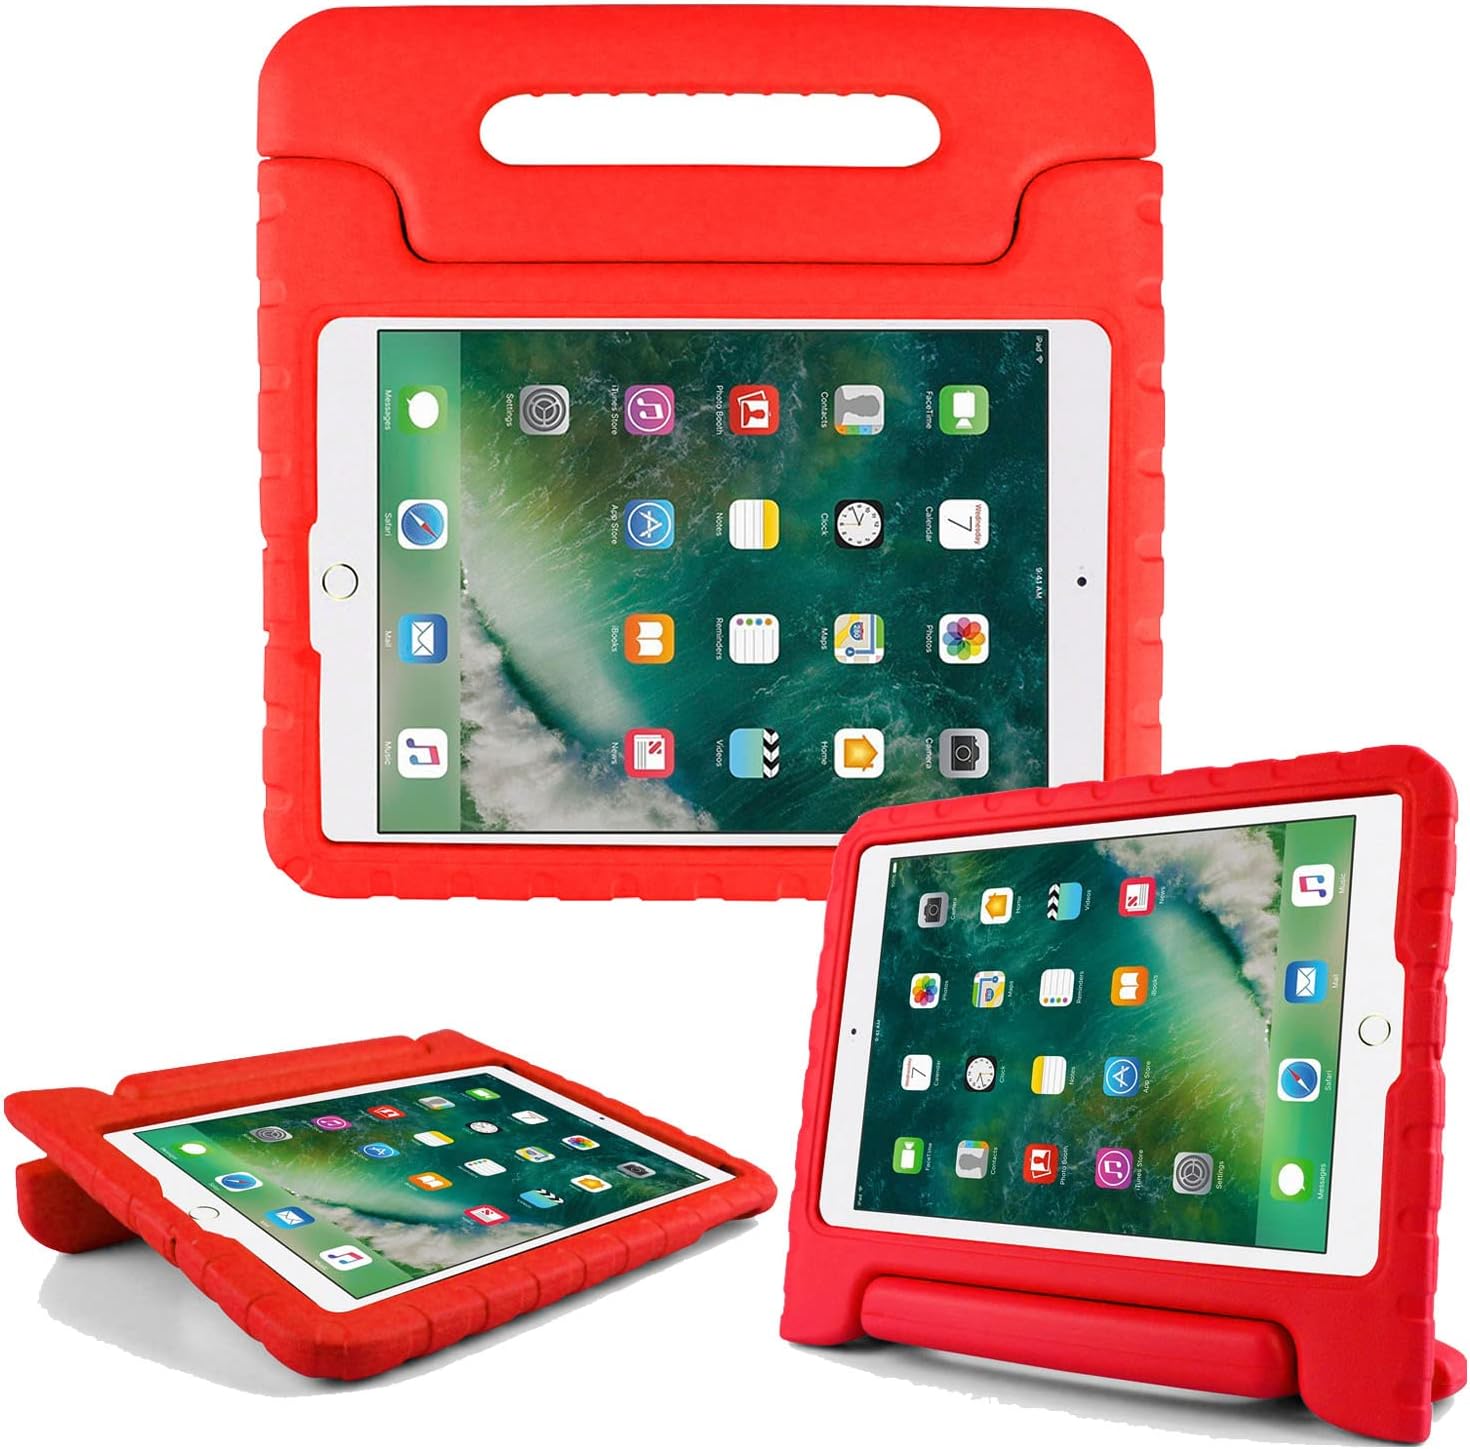 Shockproof Case w Handle & Stand for iPad 9th / 8th / 7th Gen & iPad Air 3 10.5 inch (Red) *Free Shipping*